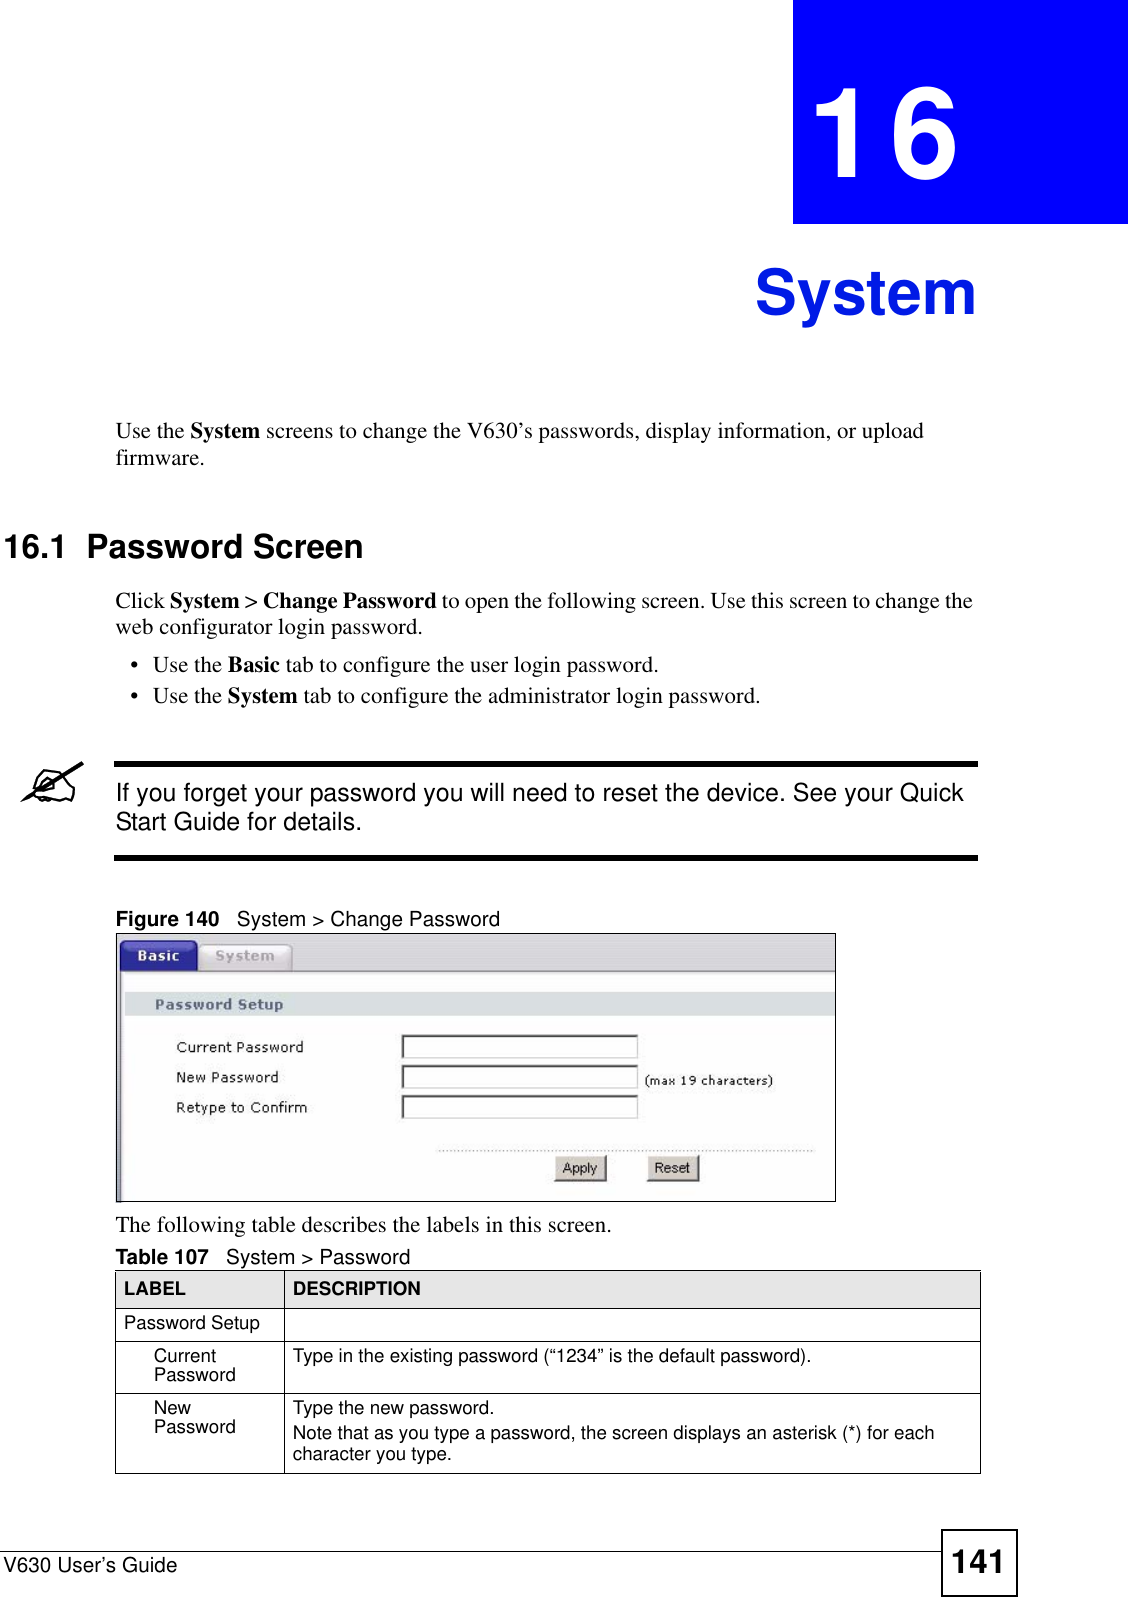 V630 User’s Guide 141CHAPTER  16 SystemUse the System screens to change the V630’s passwords, display information, or upload firmware.  16.1  Password Screen Click System &gt; Change Password to open the following screen. Use this screen to change the web configurator login password. • Use the Basic tab to configure the user login password. • Use the System tab to configure the administrator login password.&quot;If you forget your password you will need to reset the device. See your Quick Start Guide for details.Figure 140   System &gt; Change PasswordThe following table describes the labels in this screen. Table 107   System &gt; Password LABEL DESCRIPTIONPassword SetupCurrent Password Type in the existing password (“1234” is the default password).New Password Type the new password. Note that as you type a password, the screen displays an asterisk (*) for each character you type.